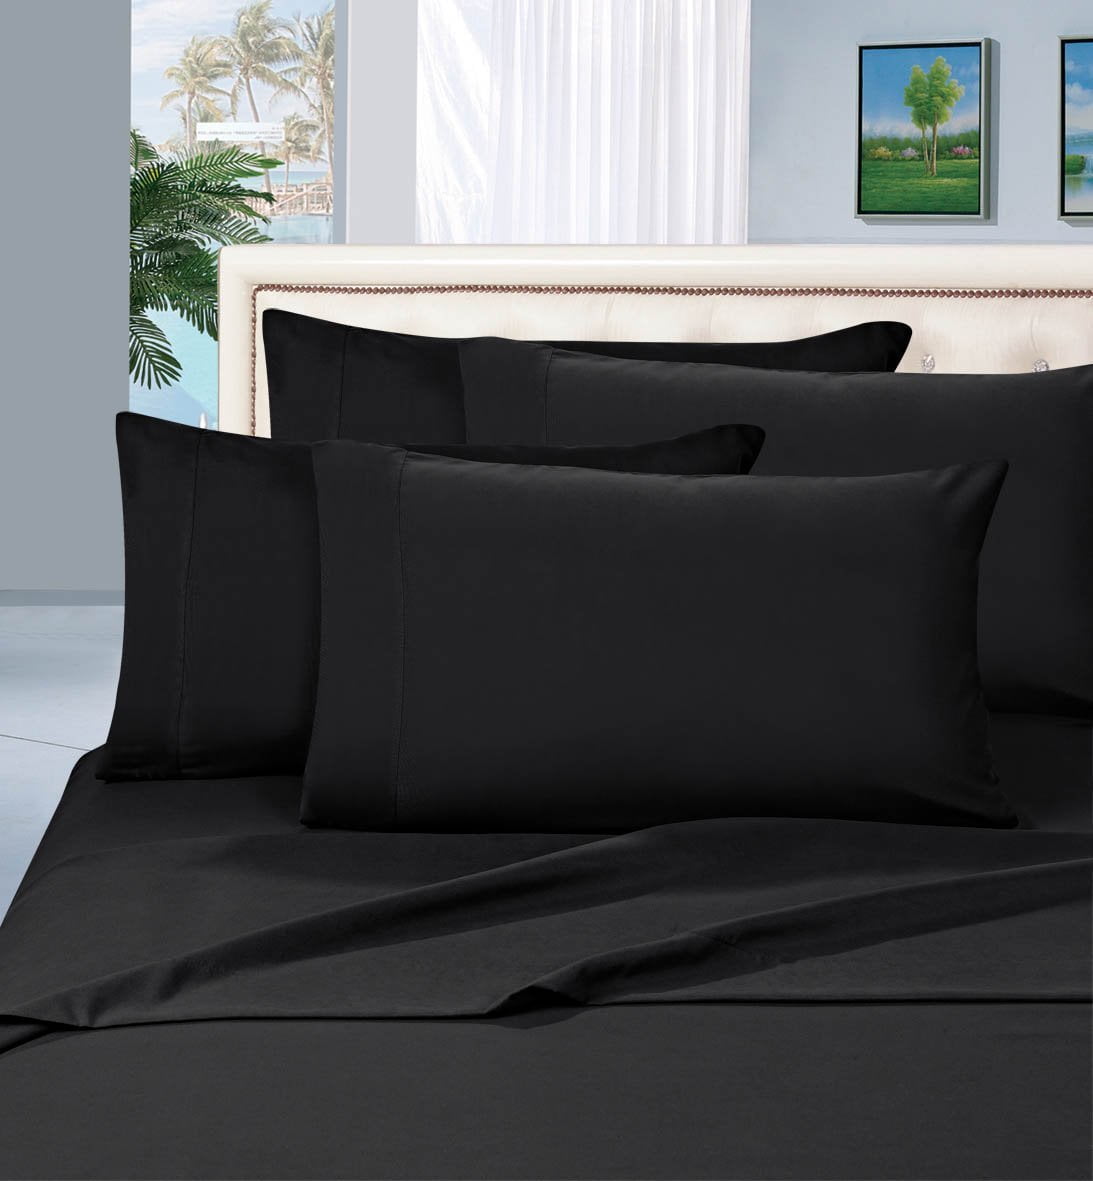 1500 Prestige Soft And Comfortable, California King Size Bed Sheet Sets